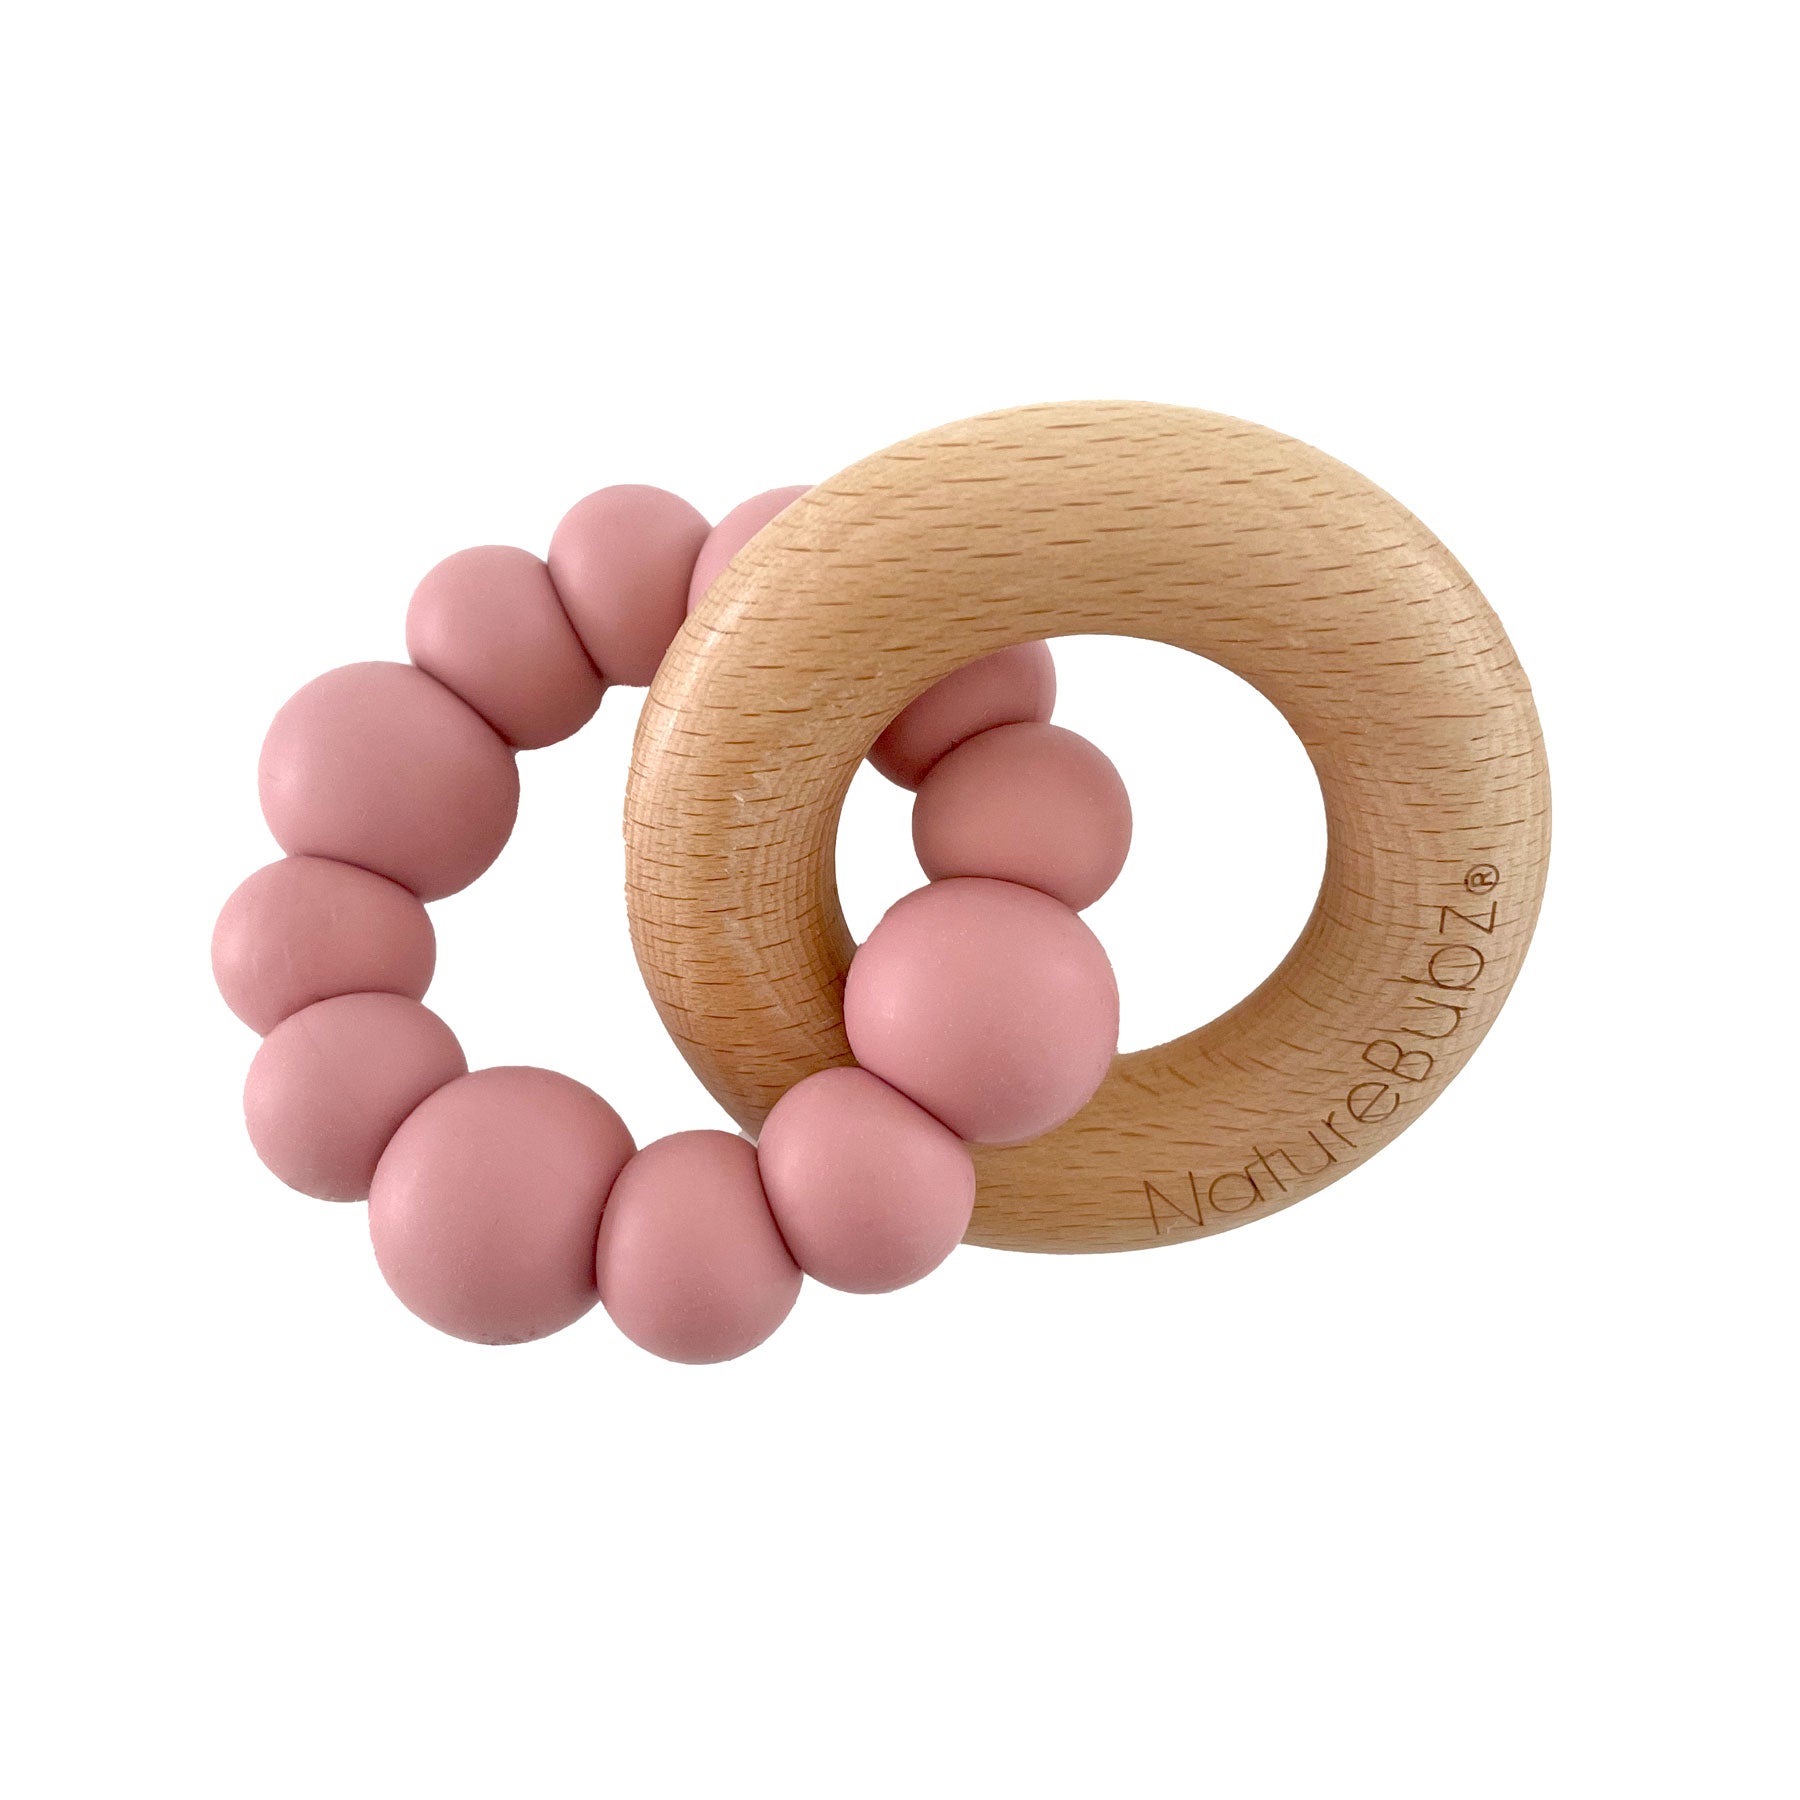 Nature Bubz Baby Silicone Cove Teether in Rose Pink Colour